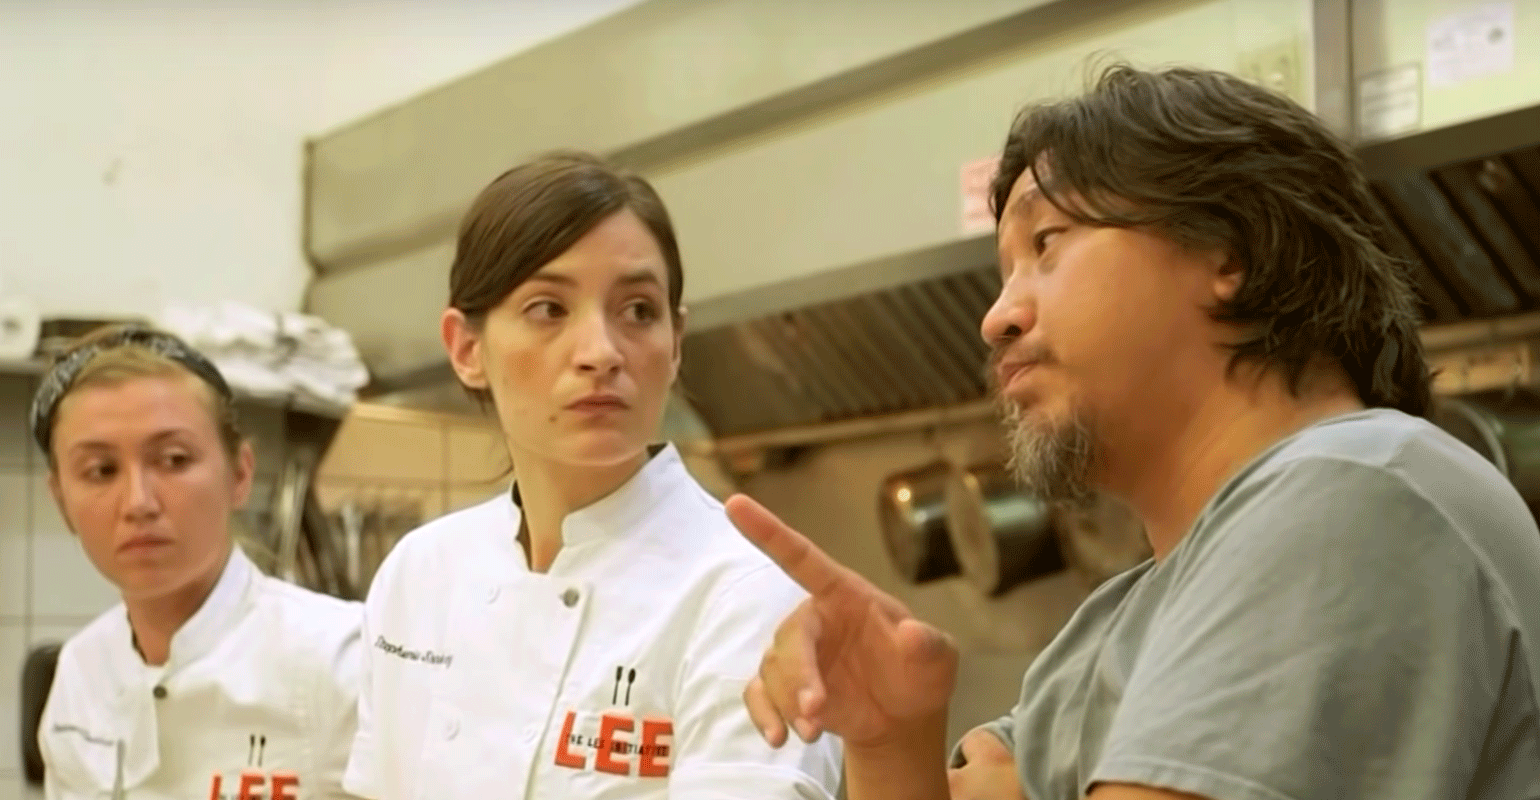 Video of the week: How chef Edward Lee is cultivating female chefs |  Restaurant Hospitality